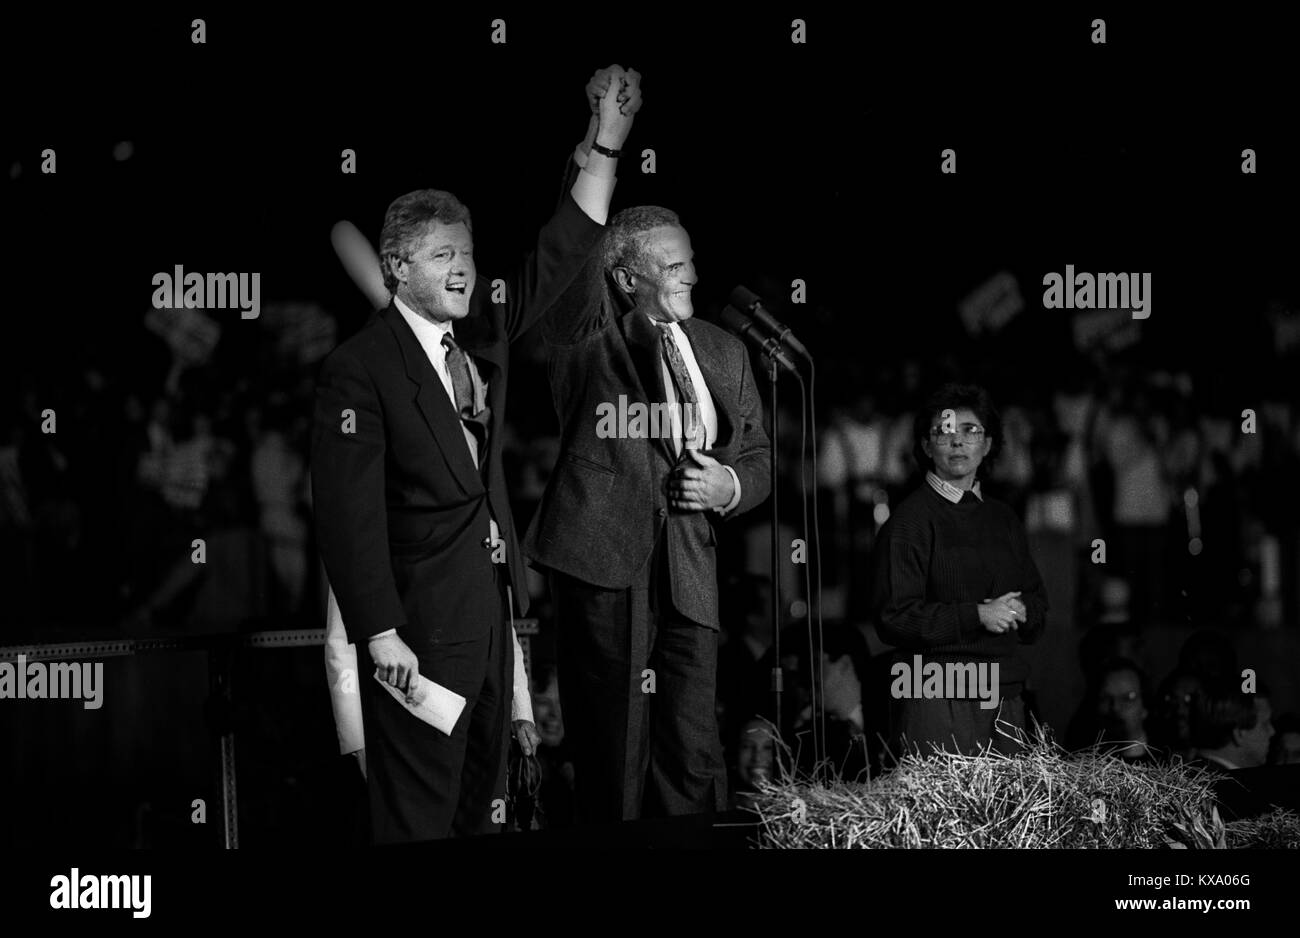 Bill Clinton as Governor of Arkansas and US Presidential Candidate during the Presidential Election Campaign October 1992. Scans made in 2017. Seen here: Clinton with Harry Belafonte at an evening rally in Wilmington, North Carolina. Photographs on the road on the 1992 Presidential Election campaign trail from Philadelphia and down the eastern states to Atlanta in Georgia. Clinton went on to become the 42nd President of the United States serving two terms from 1993 to 2001. Stock Photo